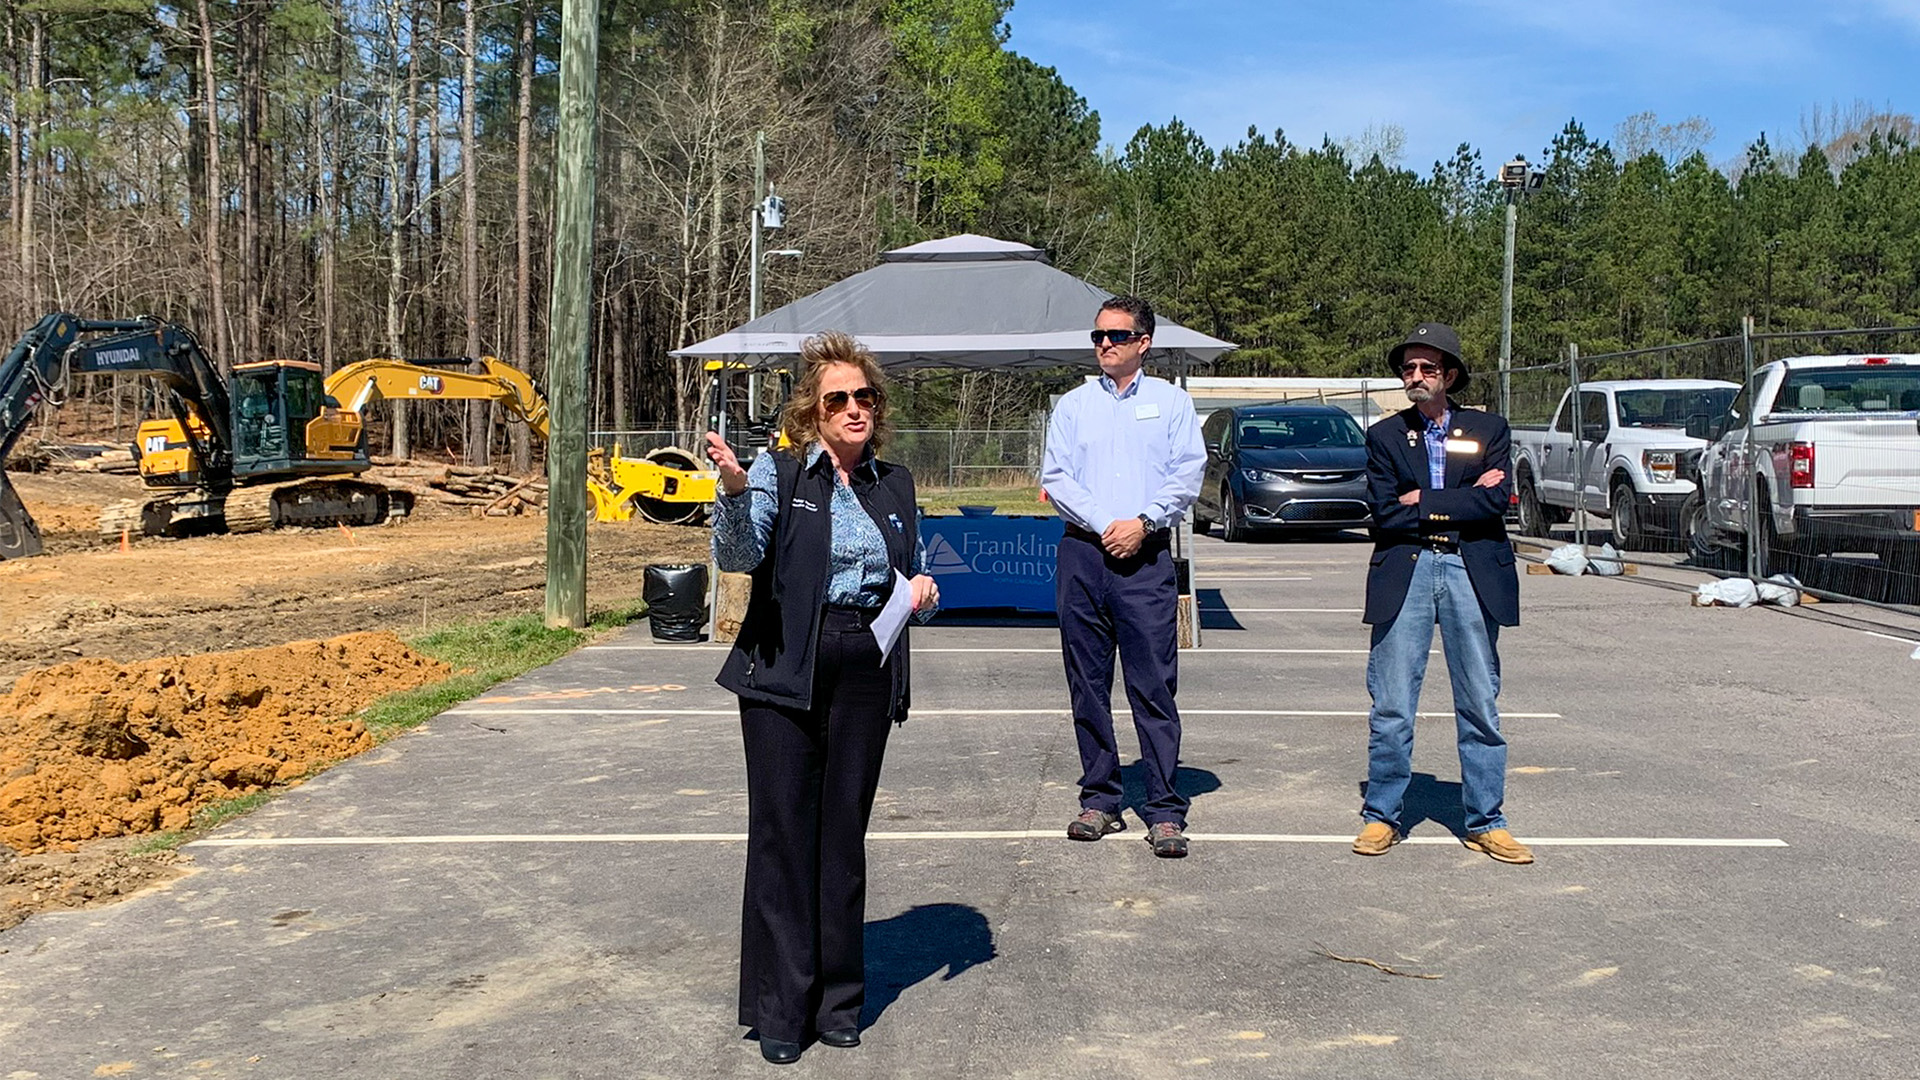 Speaking_SCHRADERGROUP-Attends-Franklin-County-NC-911-Groundbreaking-Ceremony